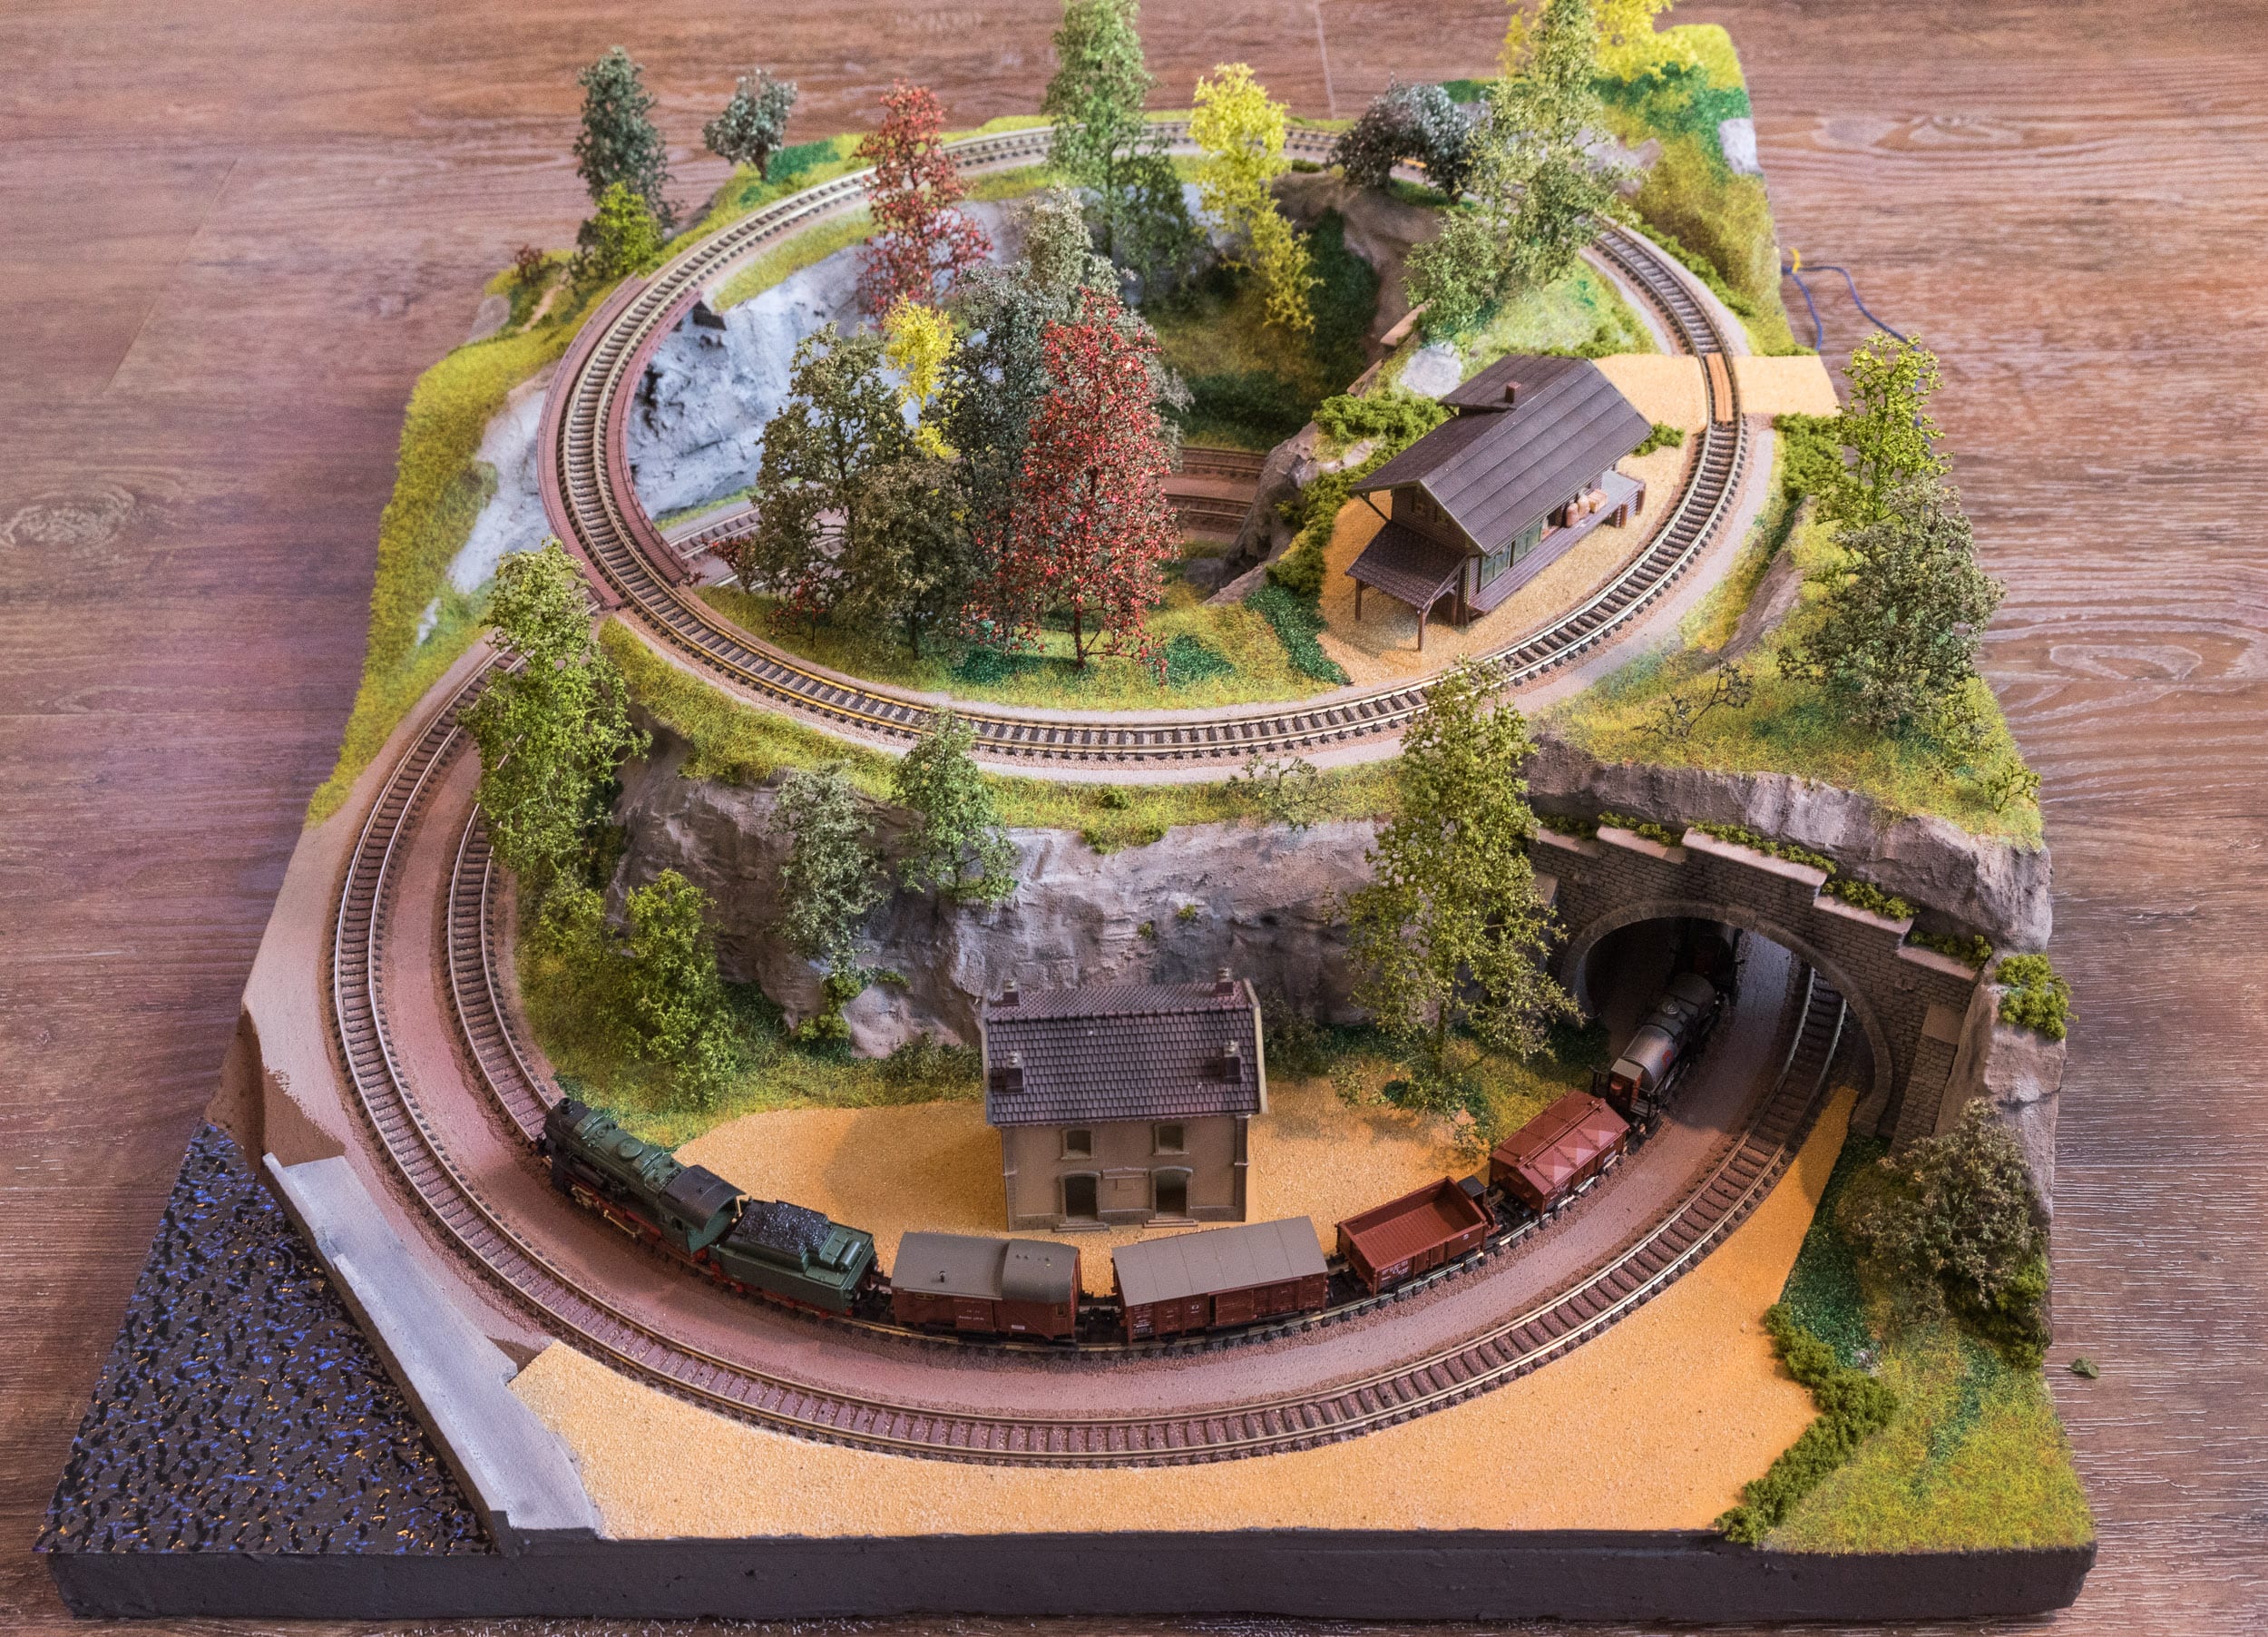 Bringing A Classic Marklin Z-Scale Model Railroad To Life With Arduino ...